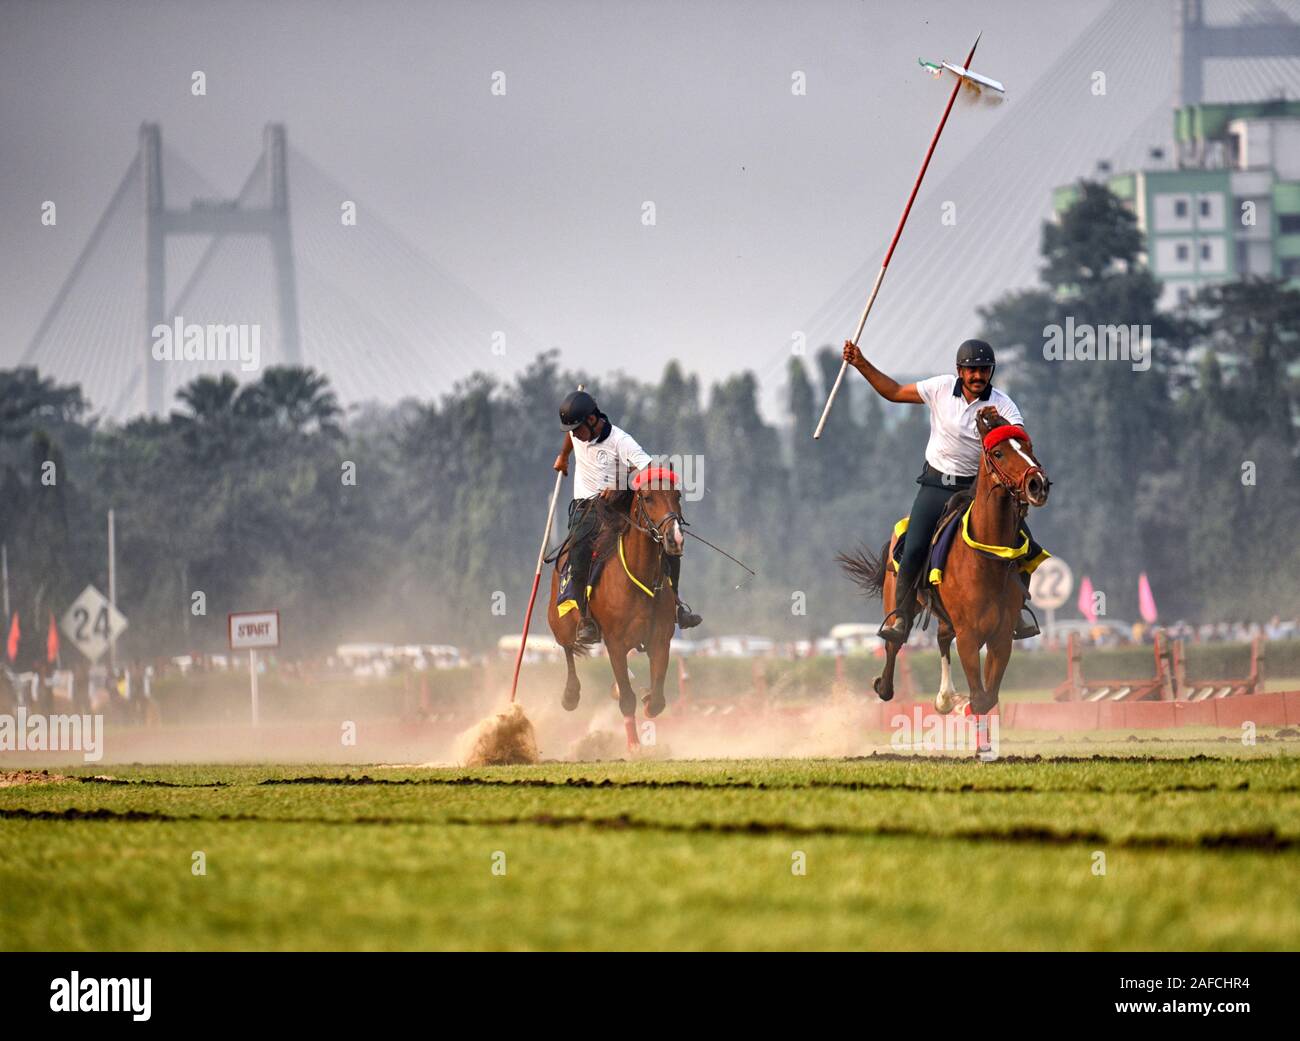 Commanders show off their skills with a Military Horses during the Vijay Diwas ( Victory day) celebration in Kolkata.Eastern army Command celebrate Vijay Diwas ( Victory day) which is on December 16 to commemorate Indian Armed Forces Victory on Bangladesh Liberation War along with Bangladesh Army against Pakistan in the year 1971. Stock Photo